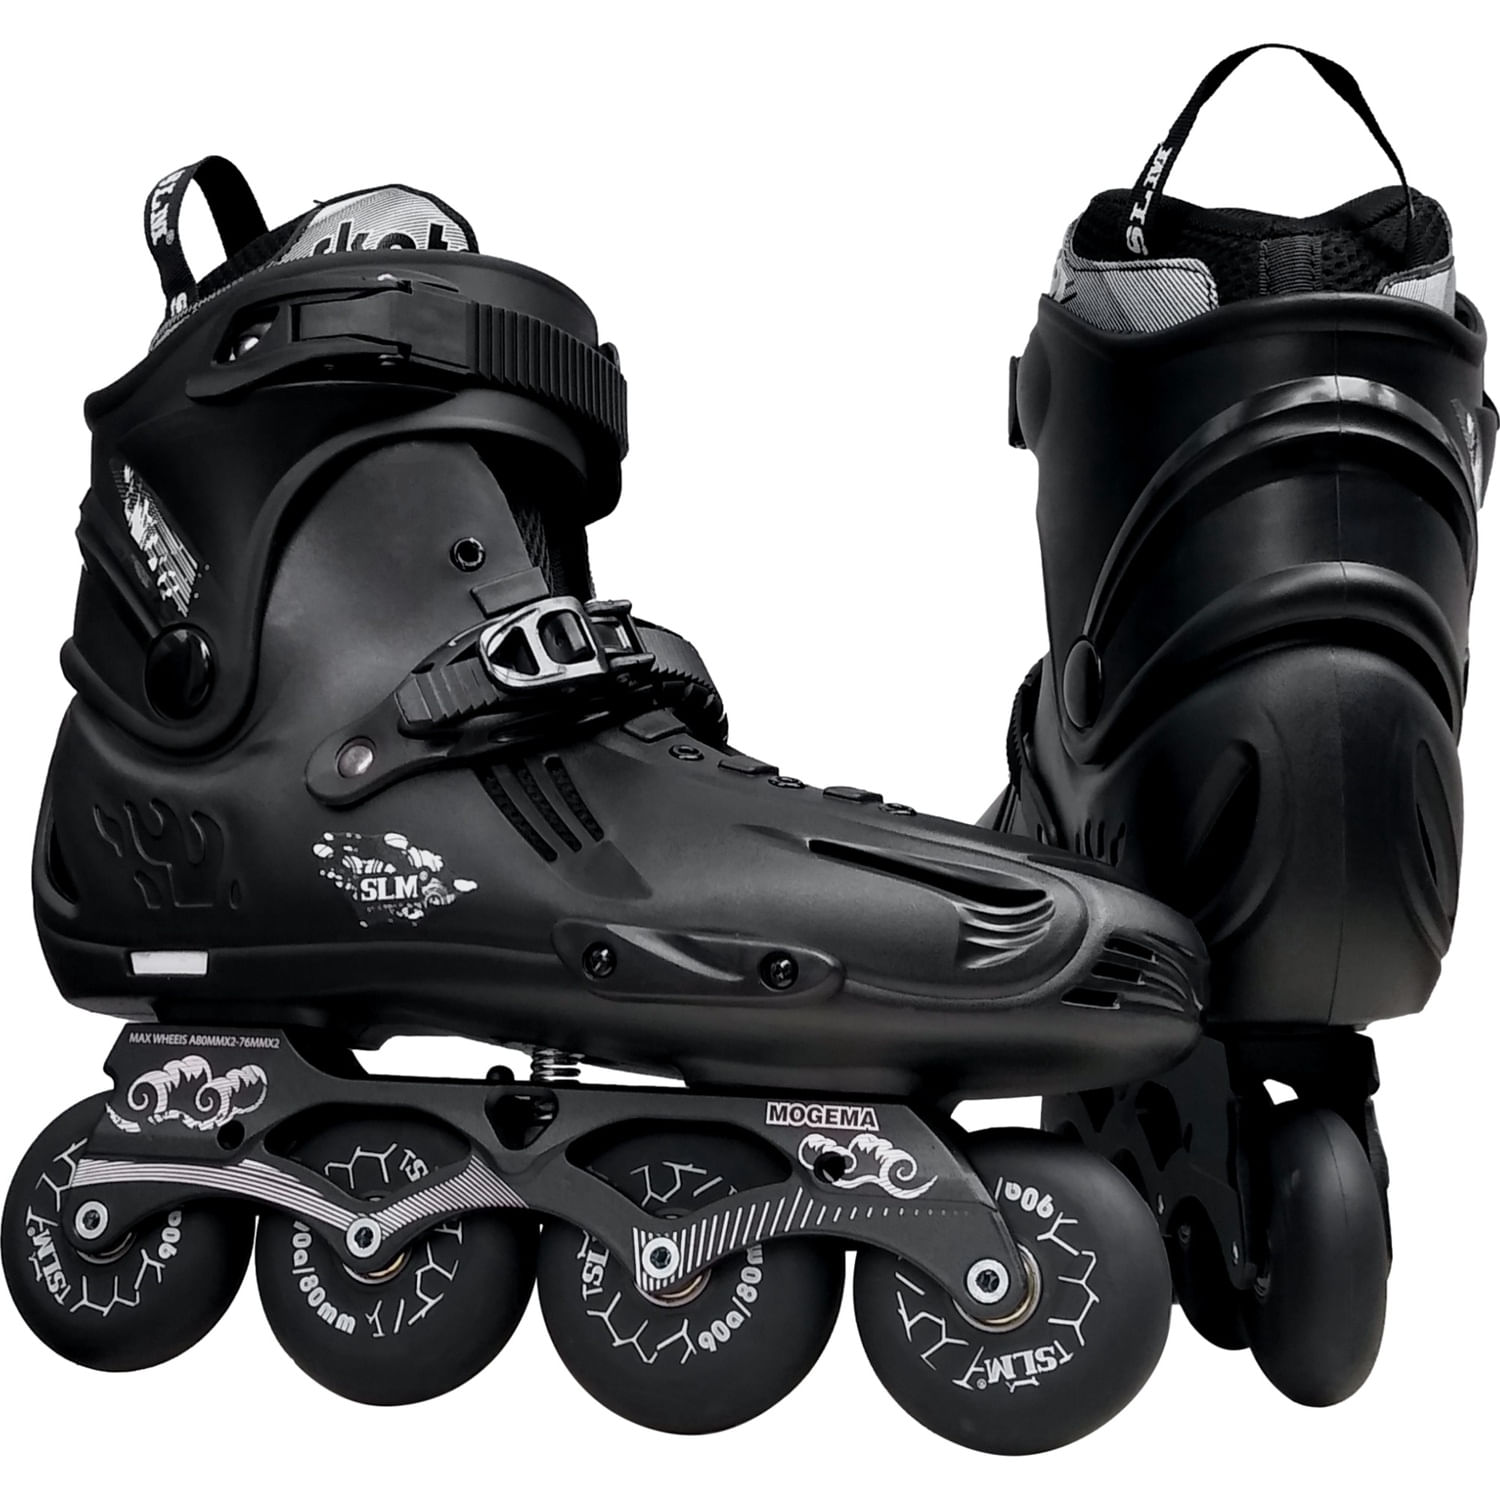 Patines Lineales T/42 SLM Freestyle Profesionales